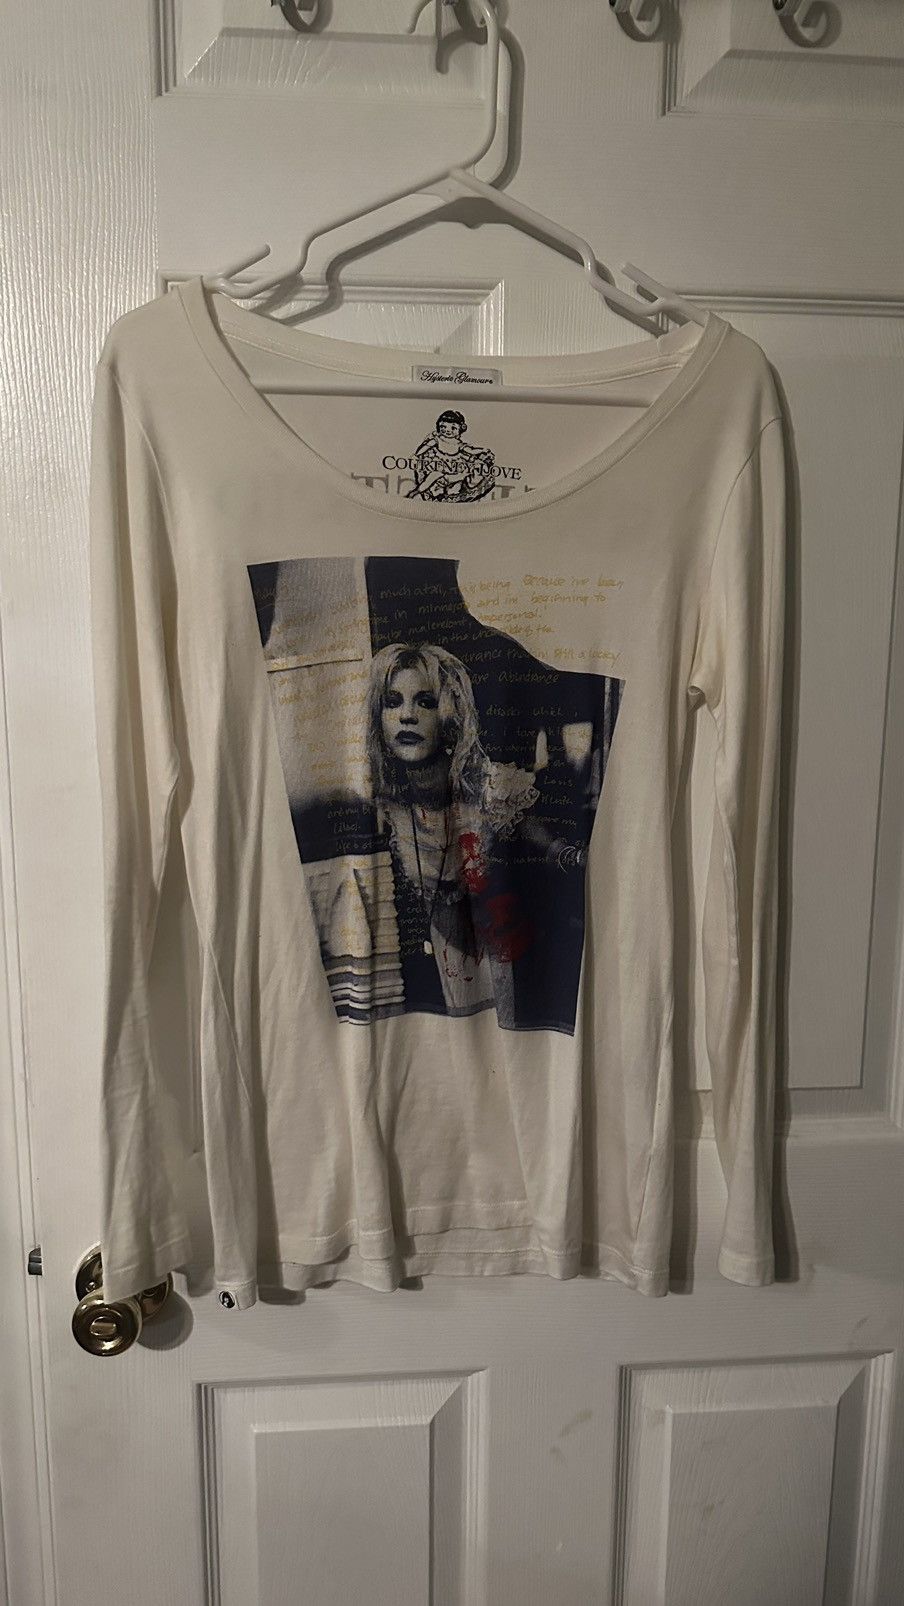 Hysteric Glamour HYSTERIC GLAMOUR COURTNEY LOVE LONG SLEEVE | Grailed